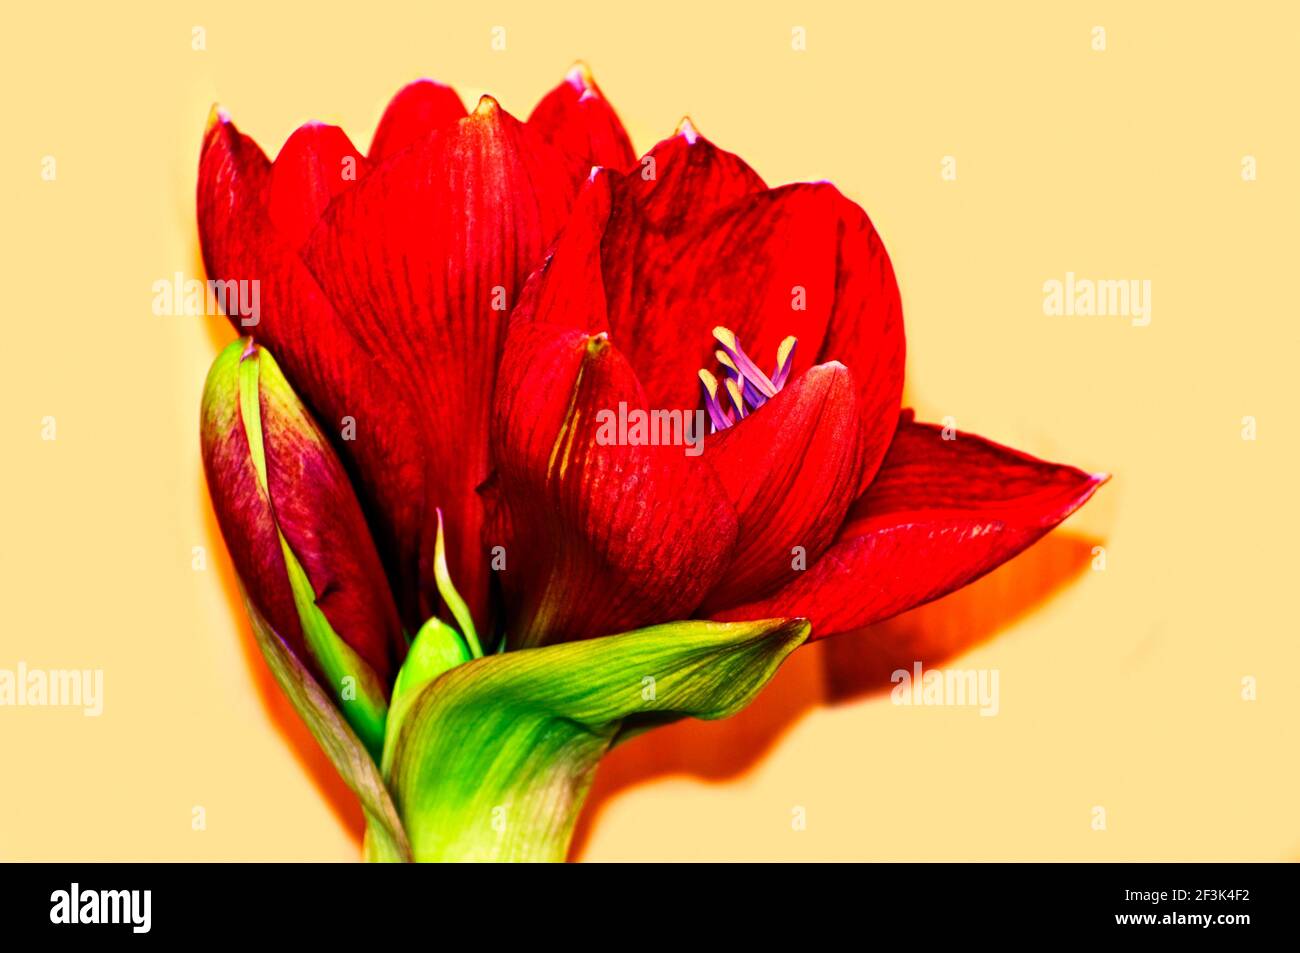 Blooming head of bright red Amaryllis flower isolated on yellow background, closeup. Stock Photo